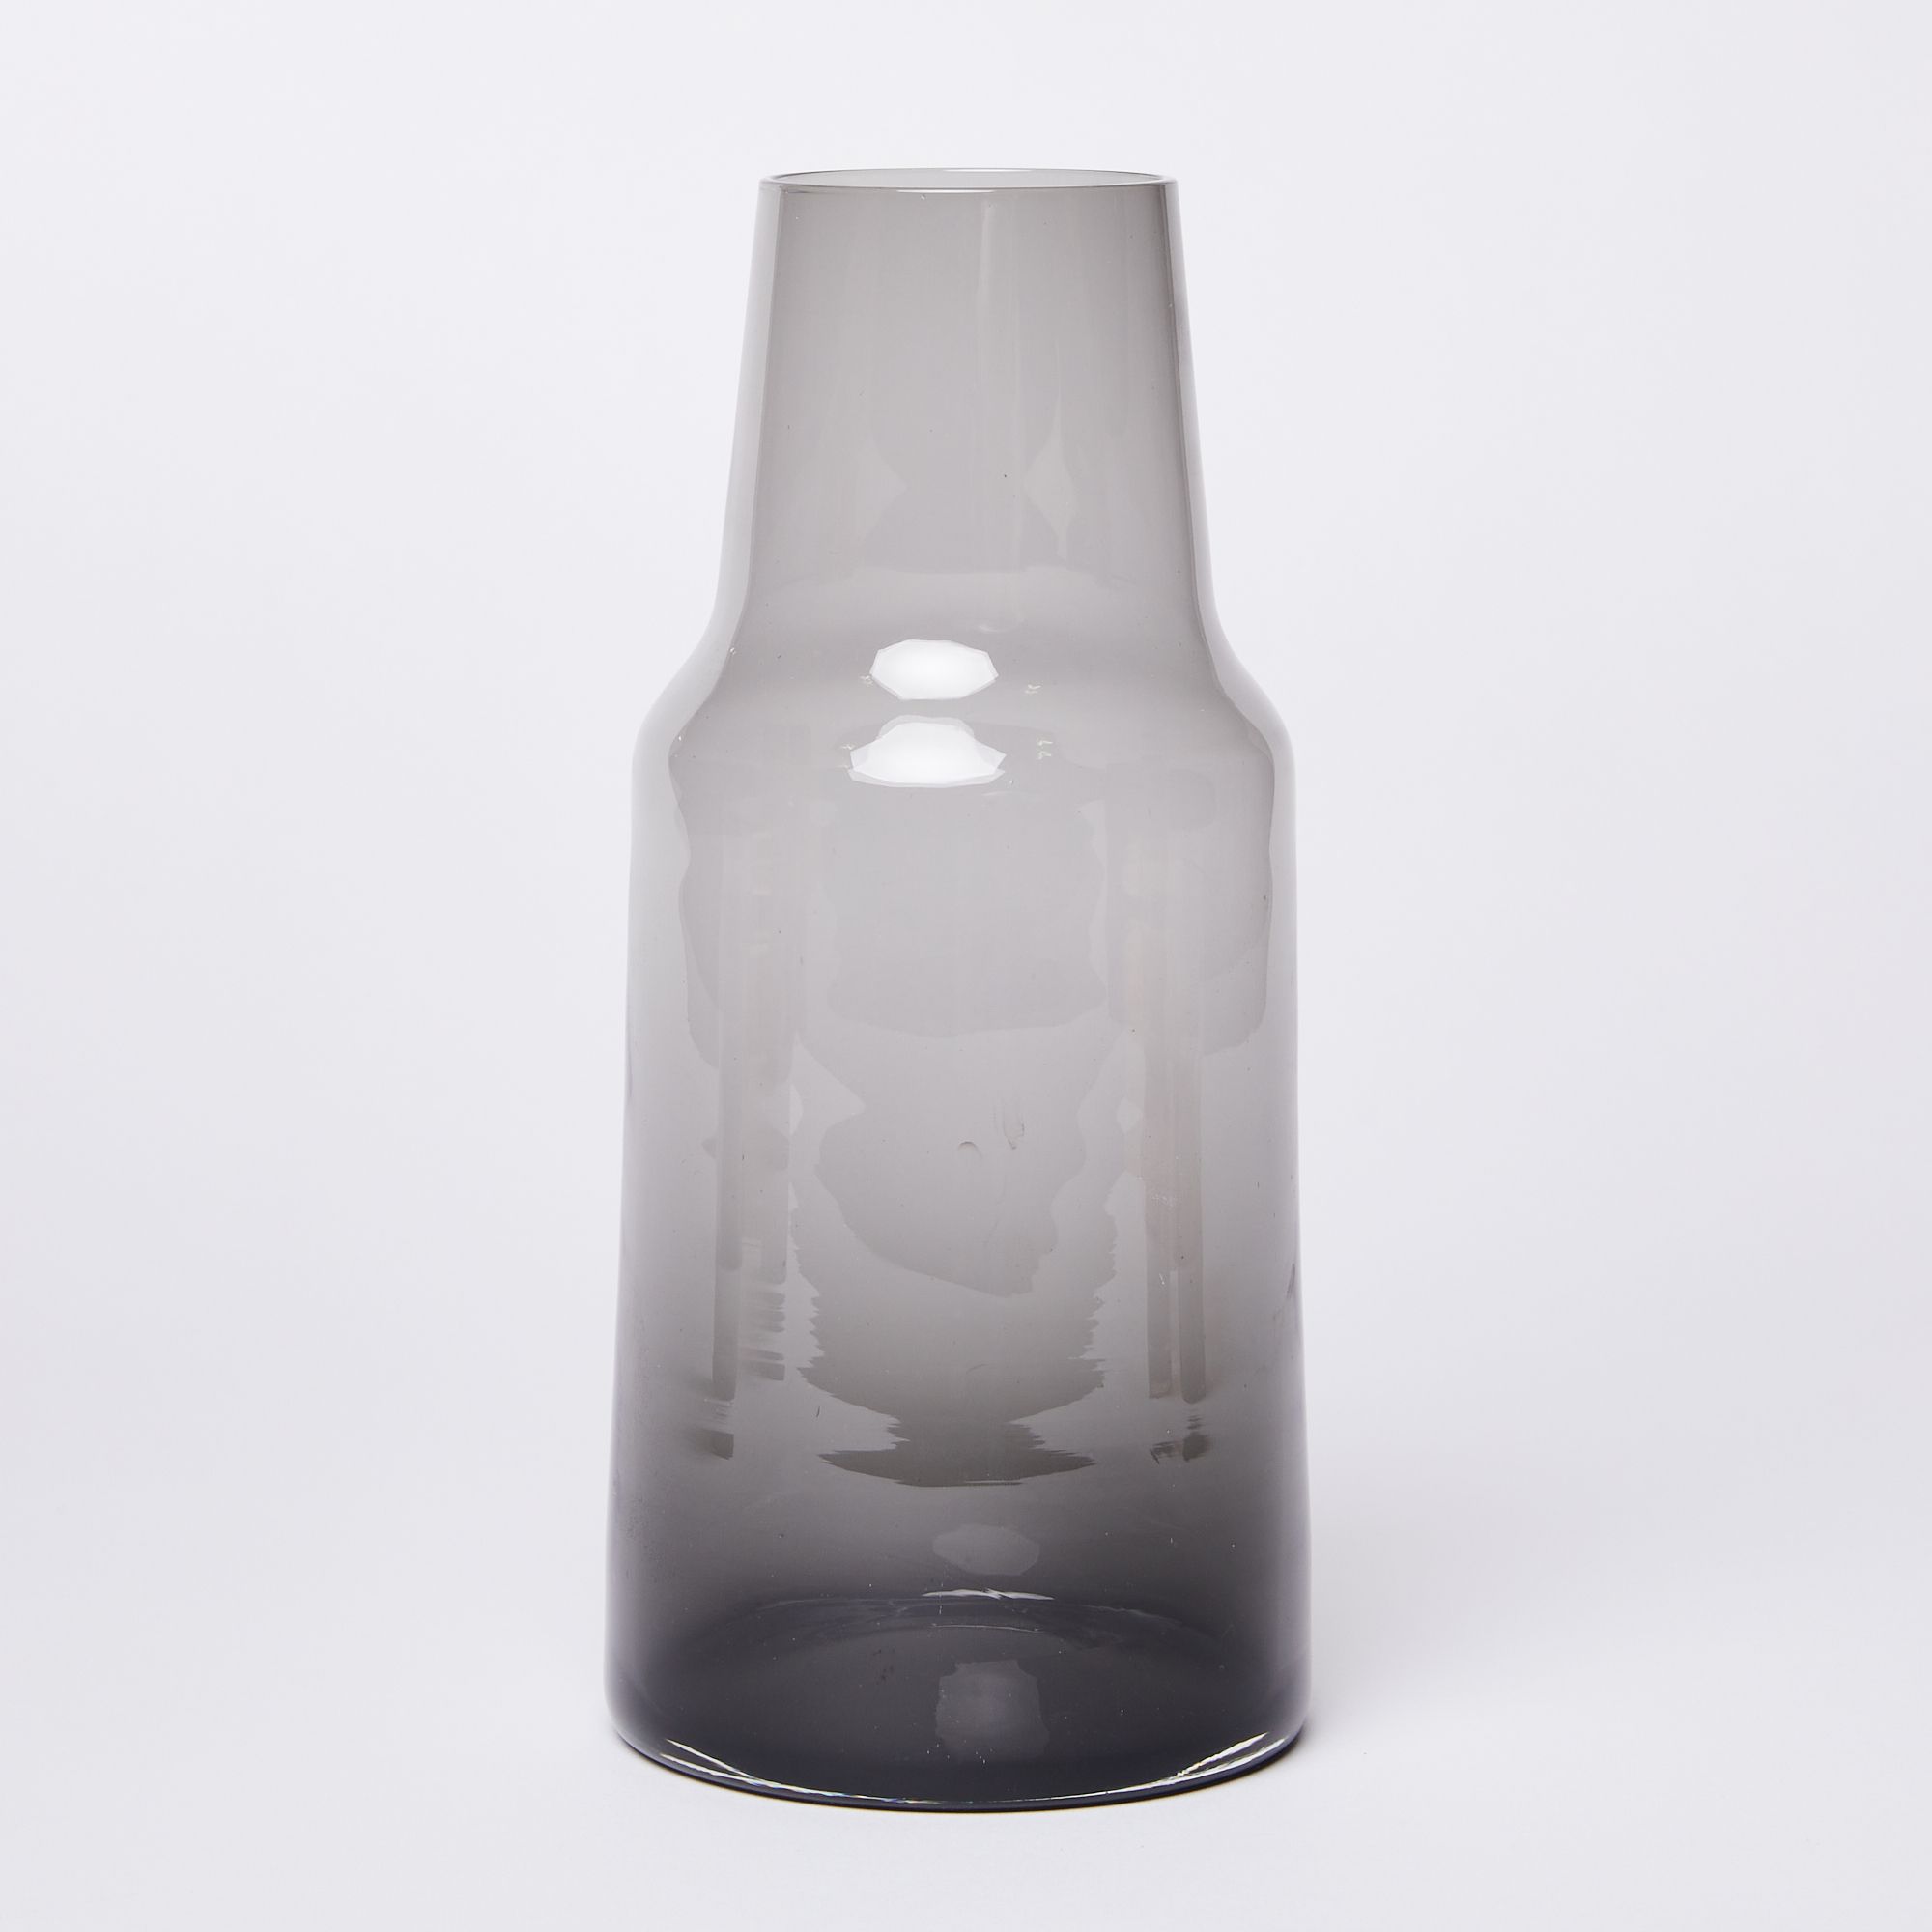 Glass carafe tapering at the top with a dark black bottom getting lighter grey towards the top